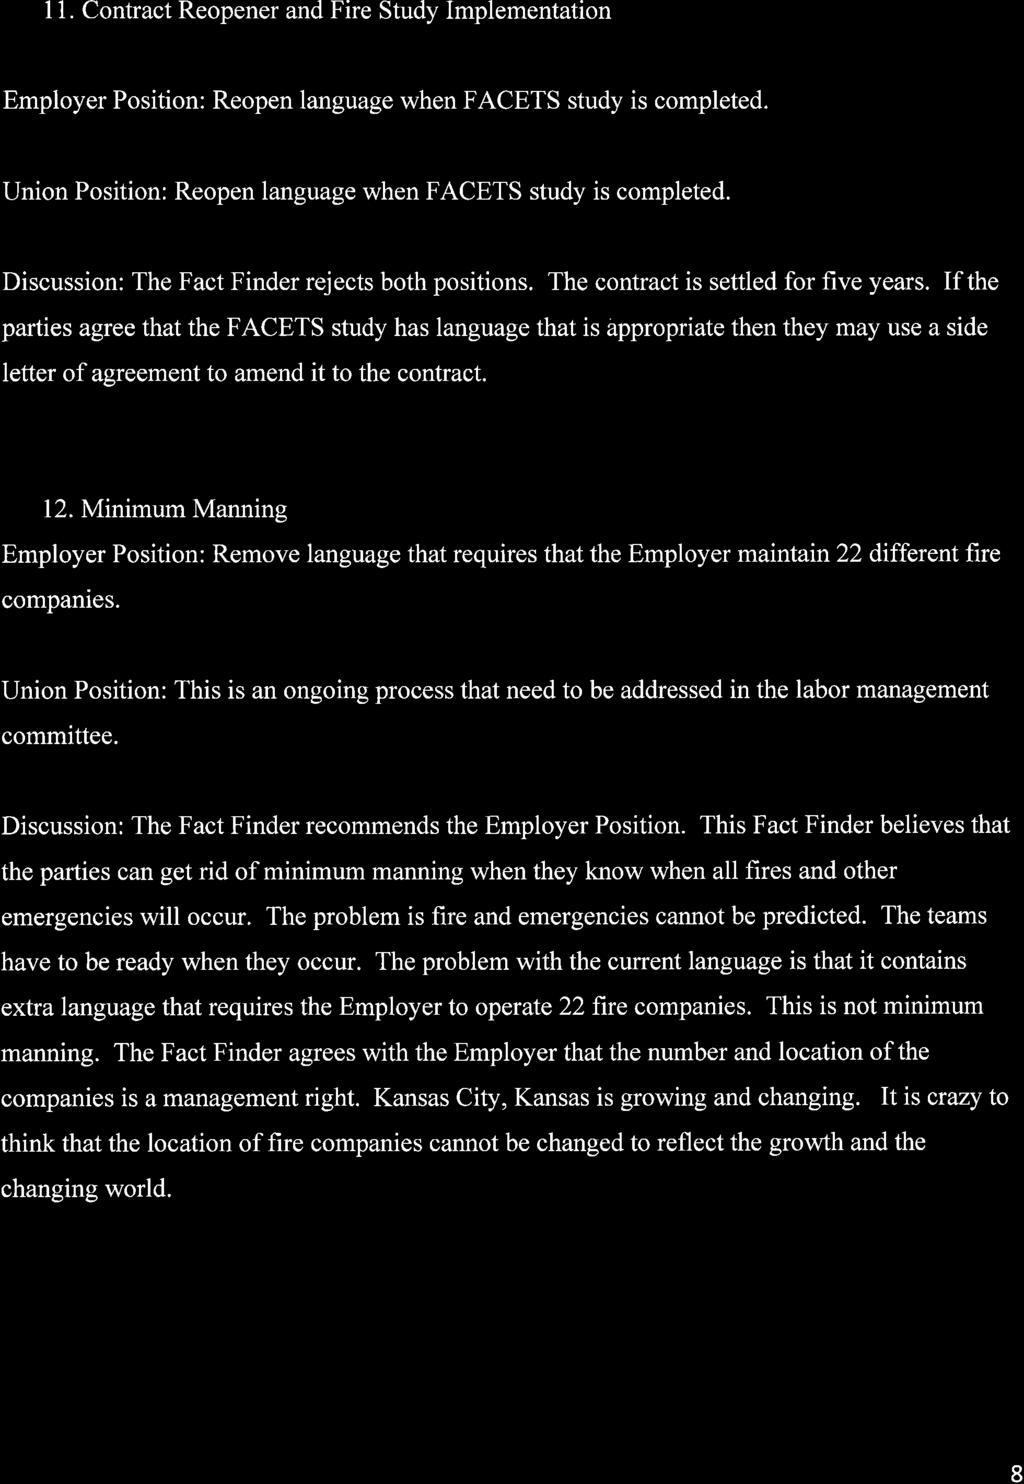 11. Contract Reopener and Fire Study Implementation Employer Position: Reopen language when FACETS study is completed. Union Position: Reopen language when FACETS study is completed.